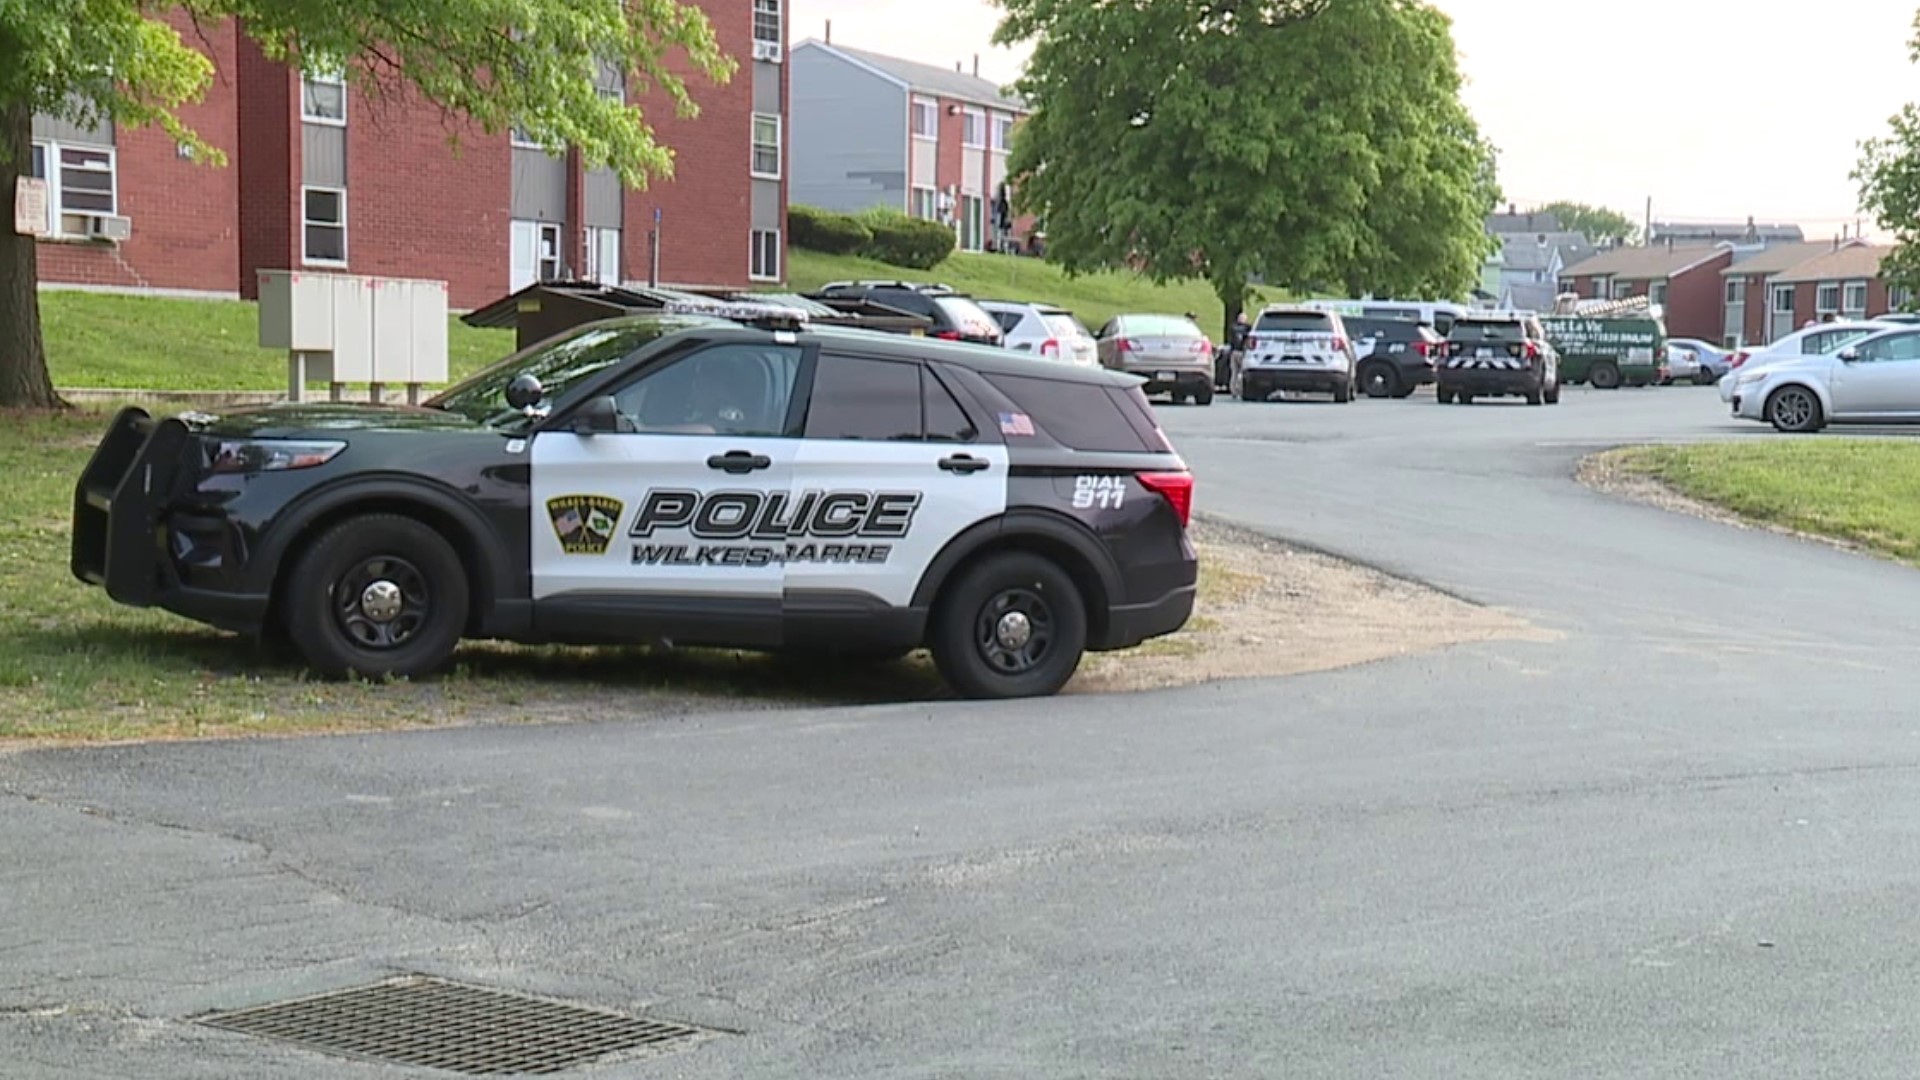 One person is in custody after shots were fired along Coal Street in Wilkes-Barre Tuesday afternoon.